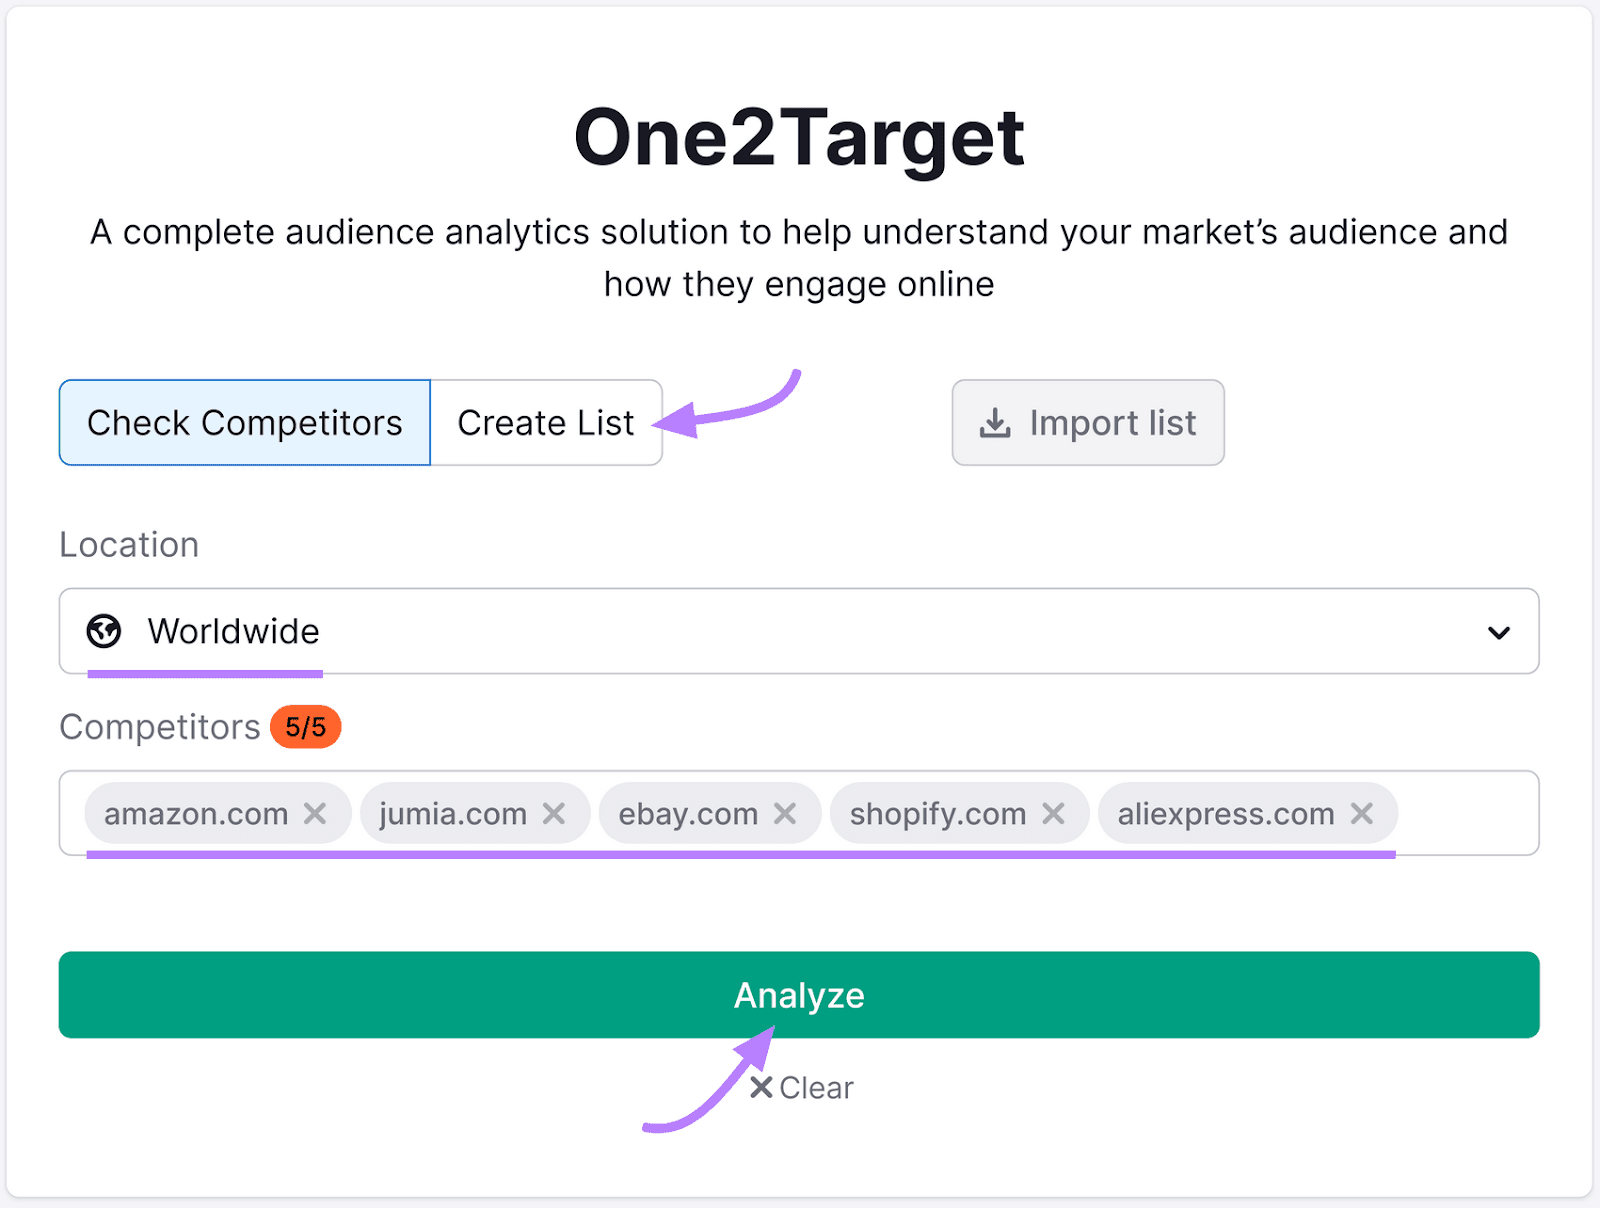 Search barroom  successful  One2Target tool